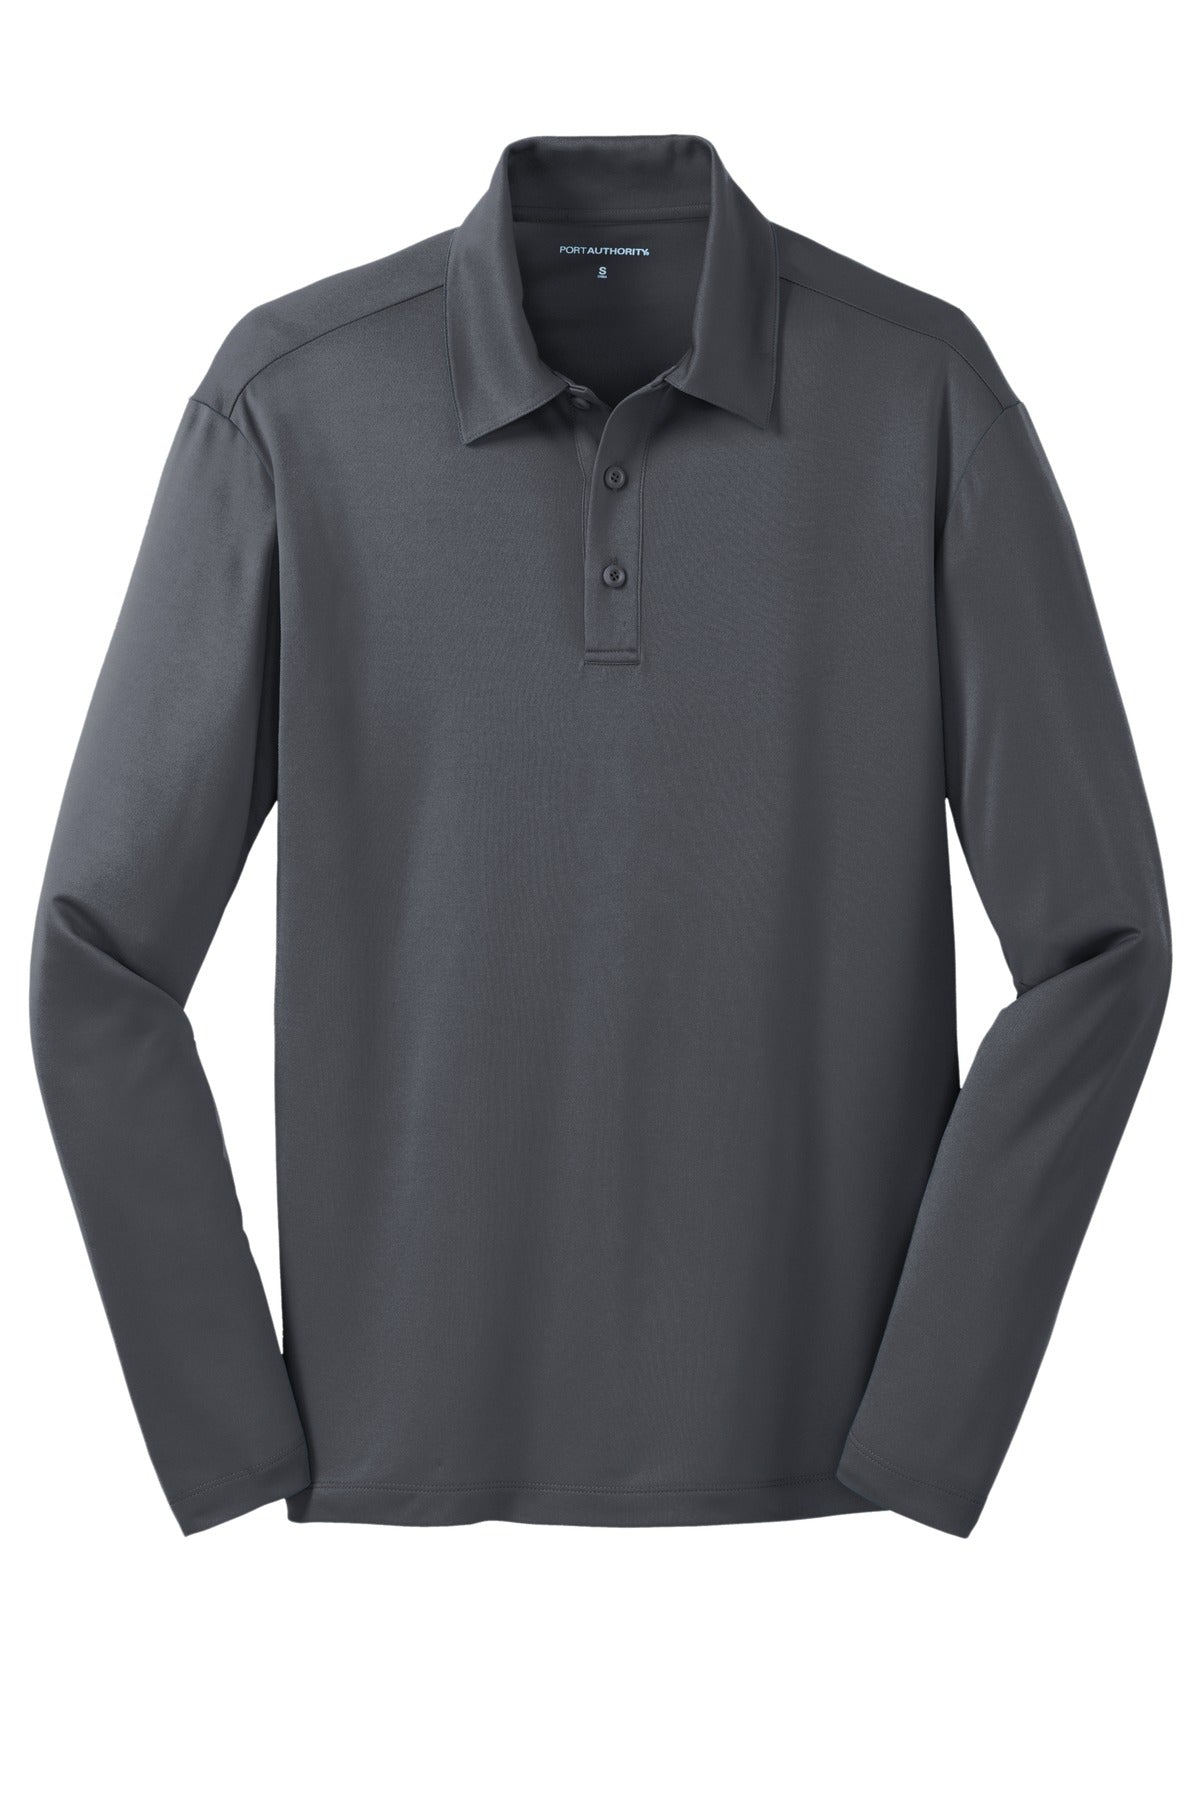 BARKER Port Authority Silk Touch Performance Long Sleeve Polo